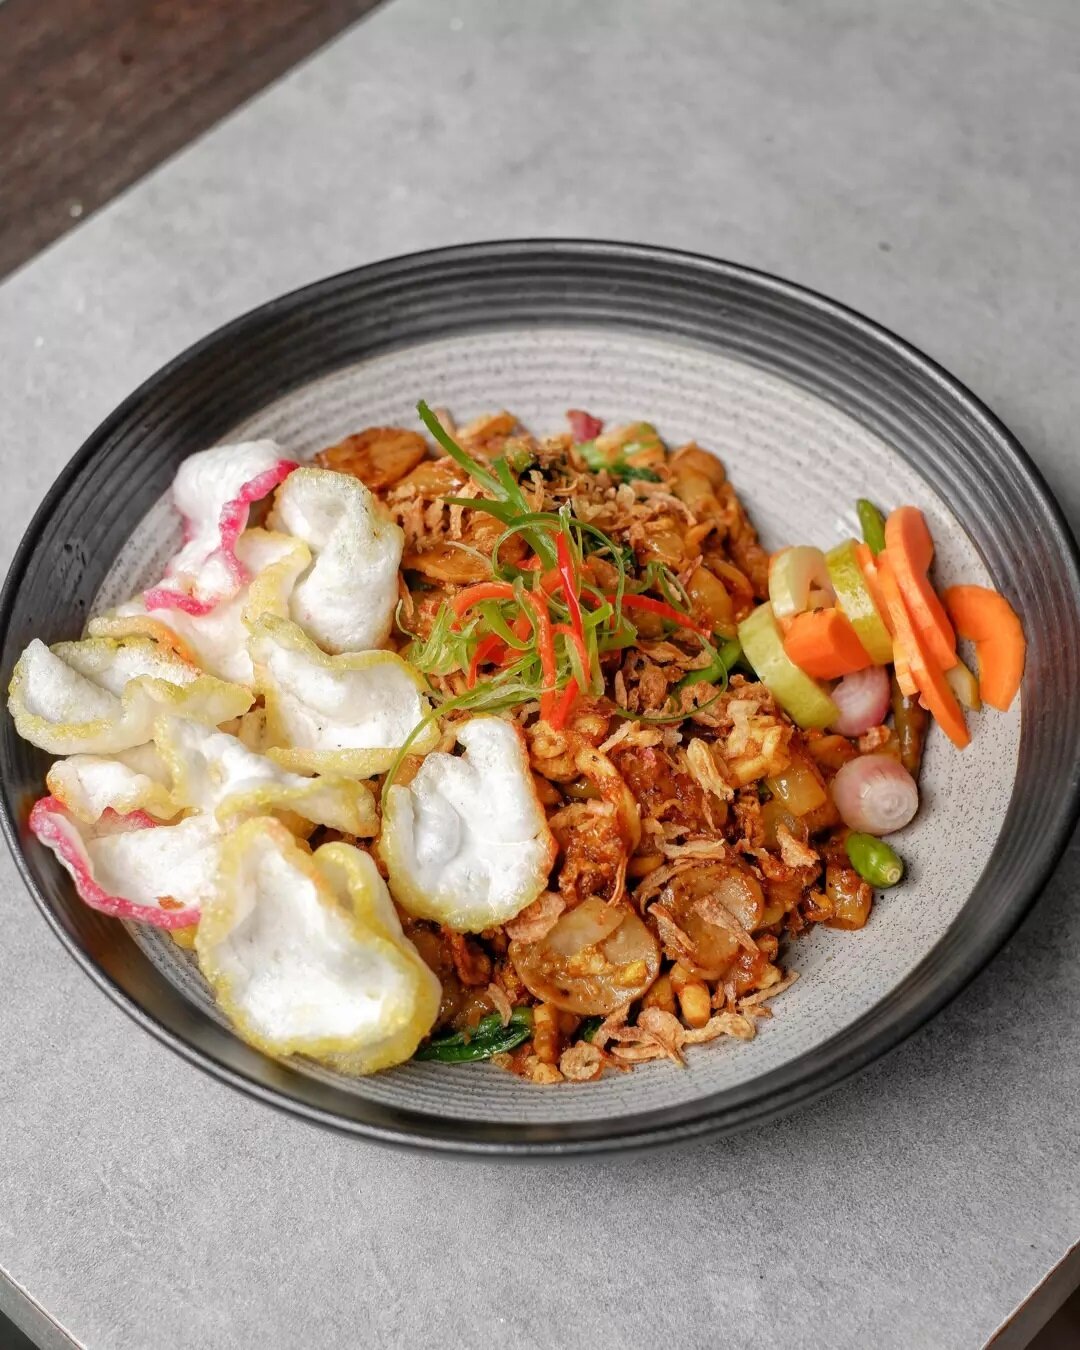 This Kwetiau Tek Tek is full of flavor, It's sweet and savory with a touch of smokey, they're as appetizing as they look and a very good idea for you who loves tek tek. 🤤👍
-
Please check &quot;Business Hours&quot; highlight if you want to dine-in..